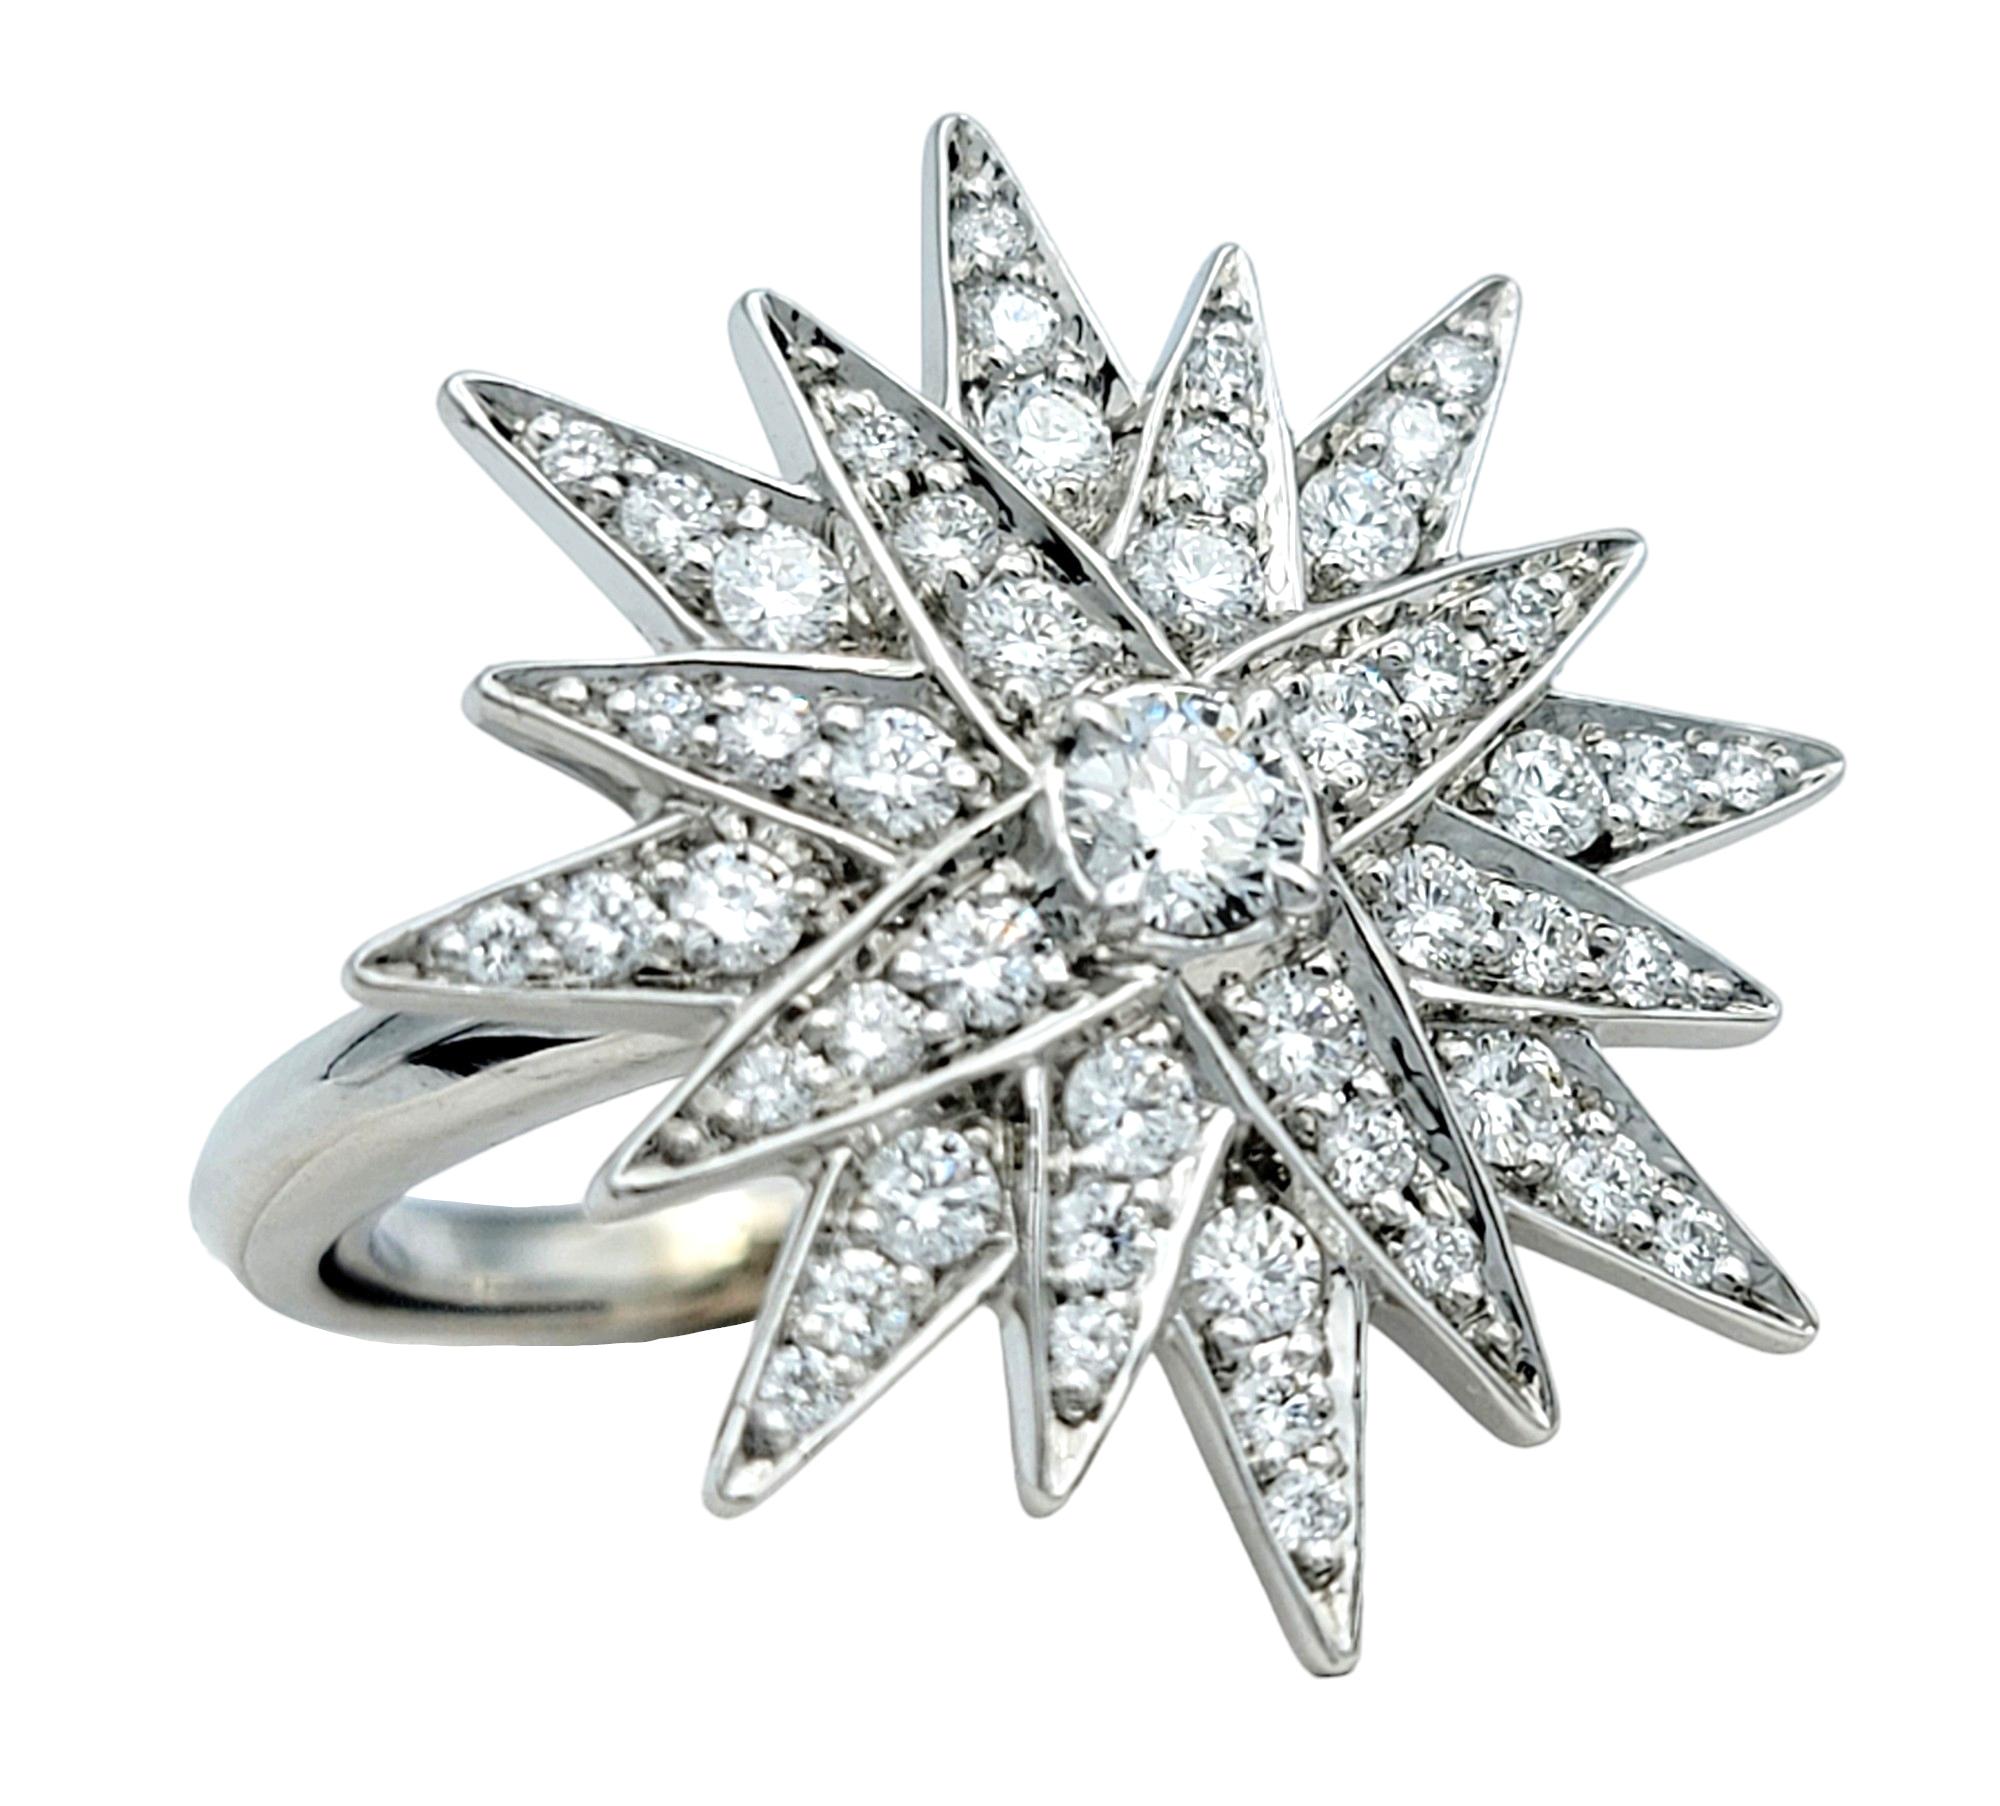 Ring Size: 8

This stunning Kat Florence diamond starburst ring in 18 karat white gold is a mesmerizing piece of jewelry that captures the essence of celestial beauty. Each flawless diamond, graded D on the color scale, reflects the purest